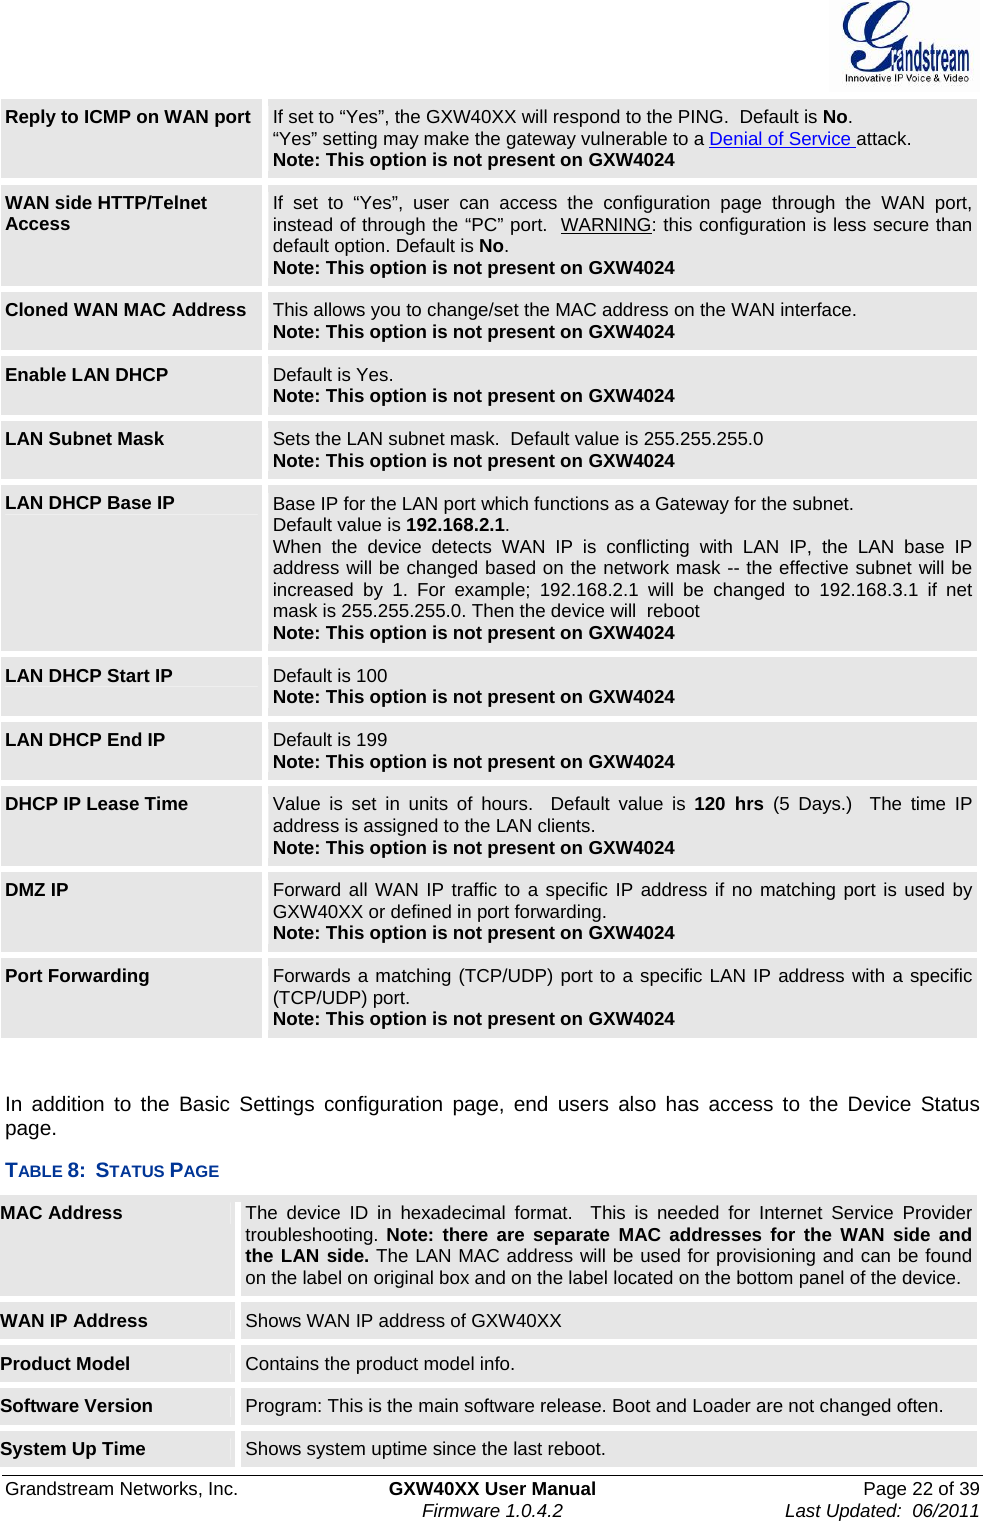  Grandstream Networks, Inc.  GXW40XX User Manual  Page 22 of 39   Firmware 1.0.4.2  Last Updated:  06/2011  Reply to ICMP on WAN port  If set to “Yes”, the GXW40XX will respond to the PING.  Default is No. “Yes” setting may make the gateway vulnerable to a Denial of Service attack. Note: This option is not present on GXW4024 WAN side HTTP/Telnet Access  If set to “Yes”, user can access the configuration page through the WAN port, instead of through the “PC” port.  WARNING: this configuration is less secure than default option. Default is No.   Note: This option is not present on GXW4024 Cloned WAN MAC Address  This allows you to change/set the MAC address on the WAN interface. Note: This option is not present on GXW4024 Enable LAN DHCP  Default is Yes.  Note: This option is not present on GXW4024 LAN Subnet Mask  Sets the LAN subnet mask.  Default value is 255.255.255.0  Note: This option is not present on GXW4024 LAN DHCP Base IP  Base IP for the LAN port which functions as a Gateway for the subnet. Default value is 192.168.2.1. When the device detects WAN IP is conflicting with LAN IP, the LAN base IP address will be changed based on the network mask -- the effective subnet will be increased by 1. For example; 192.168.2.1 will be changed to 192.168.3.1 if net mask is 255.255.255.0. Then the device will  reboot Note: This option is not present on GXW4024 LAN DHCP Start IP  Default is 100 Note: This option is not present on GXW4024 LAN DHCP End IP  Default is 199 Note: This option is not present on GXW4024 DHCP IP Lease Time  Value is set in units of hours.  Default value is 120 hrs (5 Days.)  The time IP address is assigned to the LAN clients. Note: This option is not present on GXW4024 DMZ IP  Forward all WAN IP traffic to a specific IP address if no matching port is used by GXW40XX or defined in port forwarding. Note: This option is not present on GXW4024 Port Forwarding  Forwards a matching (TCP/UDP) port to a specific LAN IP address with a specific (TCP/UDP) port. Note: This option is not present on GXW4024   In addition to the Basic Settings configuration page, end users also has access to the Device Status page. TABLE 8:  STATUS PAGE  MAC Address  The device ID in hexadecimal format.  This is needed for Internet Service Providertroubleshooting. Note: there are separate MAC addresses for the WAN side and the LAN side. The LAN MAC address will be used for provisioning and can be found on the label on original box and on the label located on the bottom panel of the device. WAN IP Address  Shows WAN IP address of GXW40XX  Product Model  Contains the product model info. Software Version  Program: This is the main software release. Boot and Loader are not changed often. System Up Time  Shows system uptime since the last reboot. 